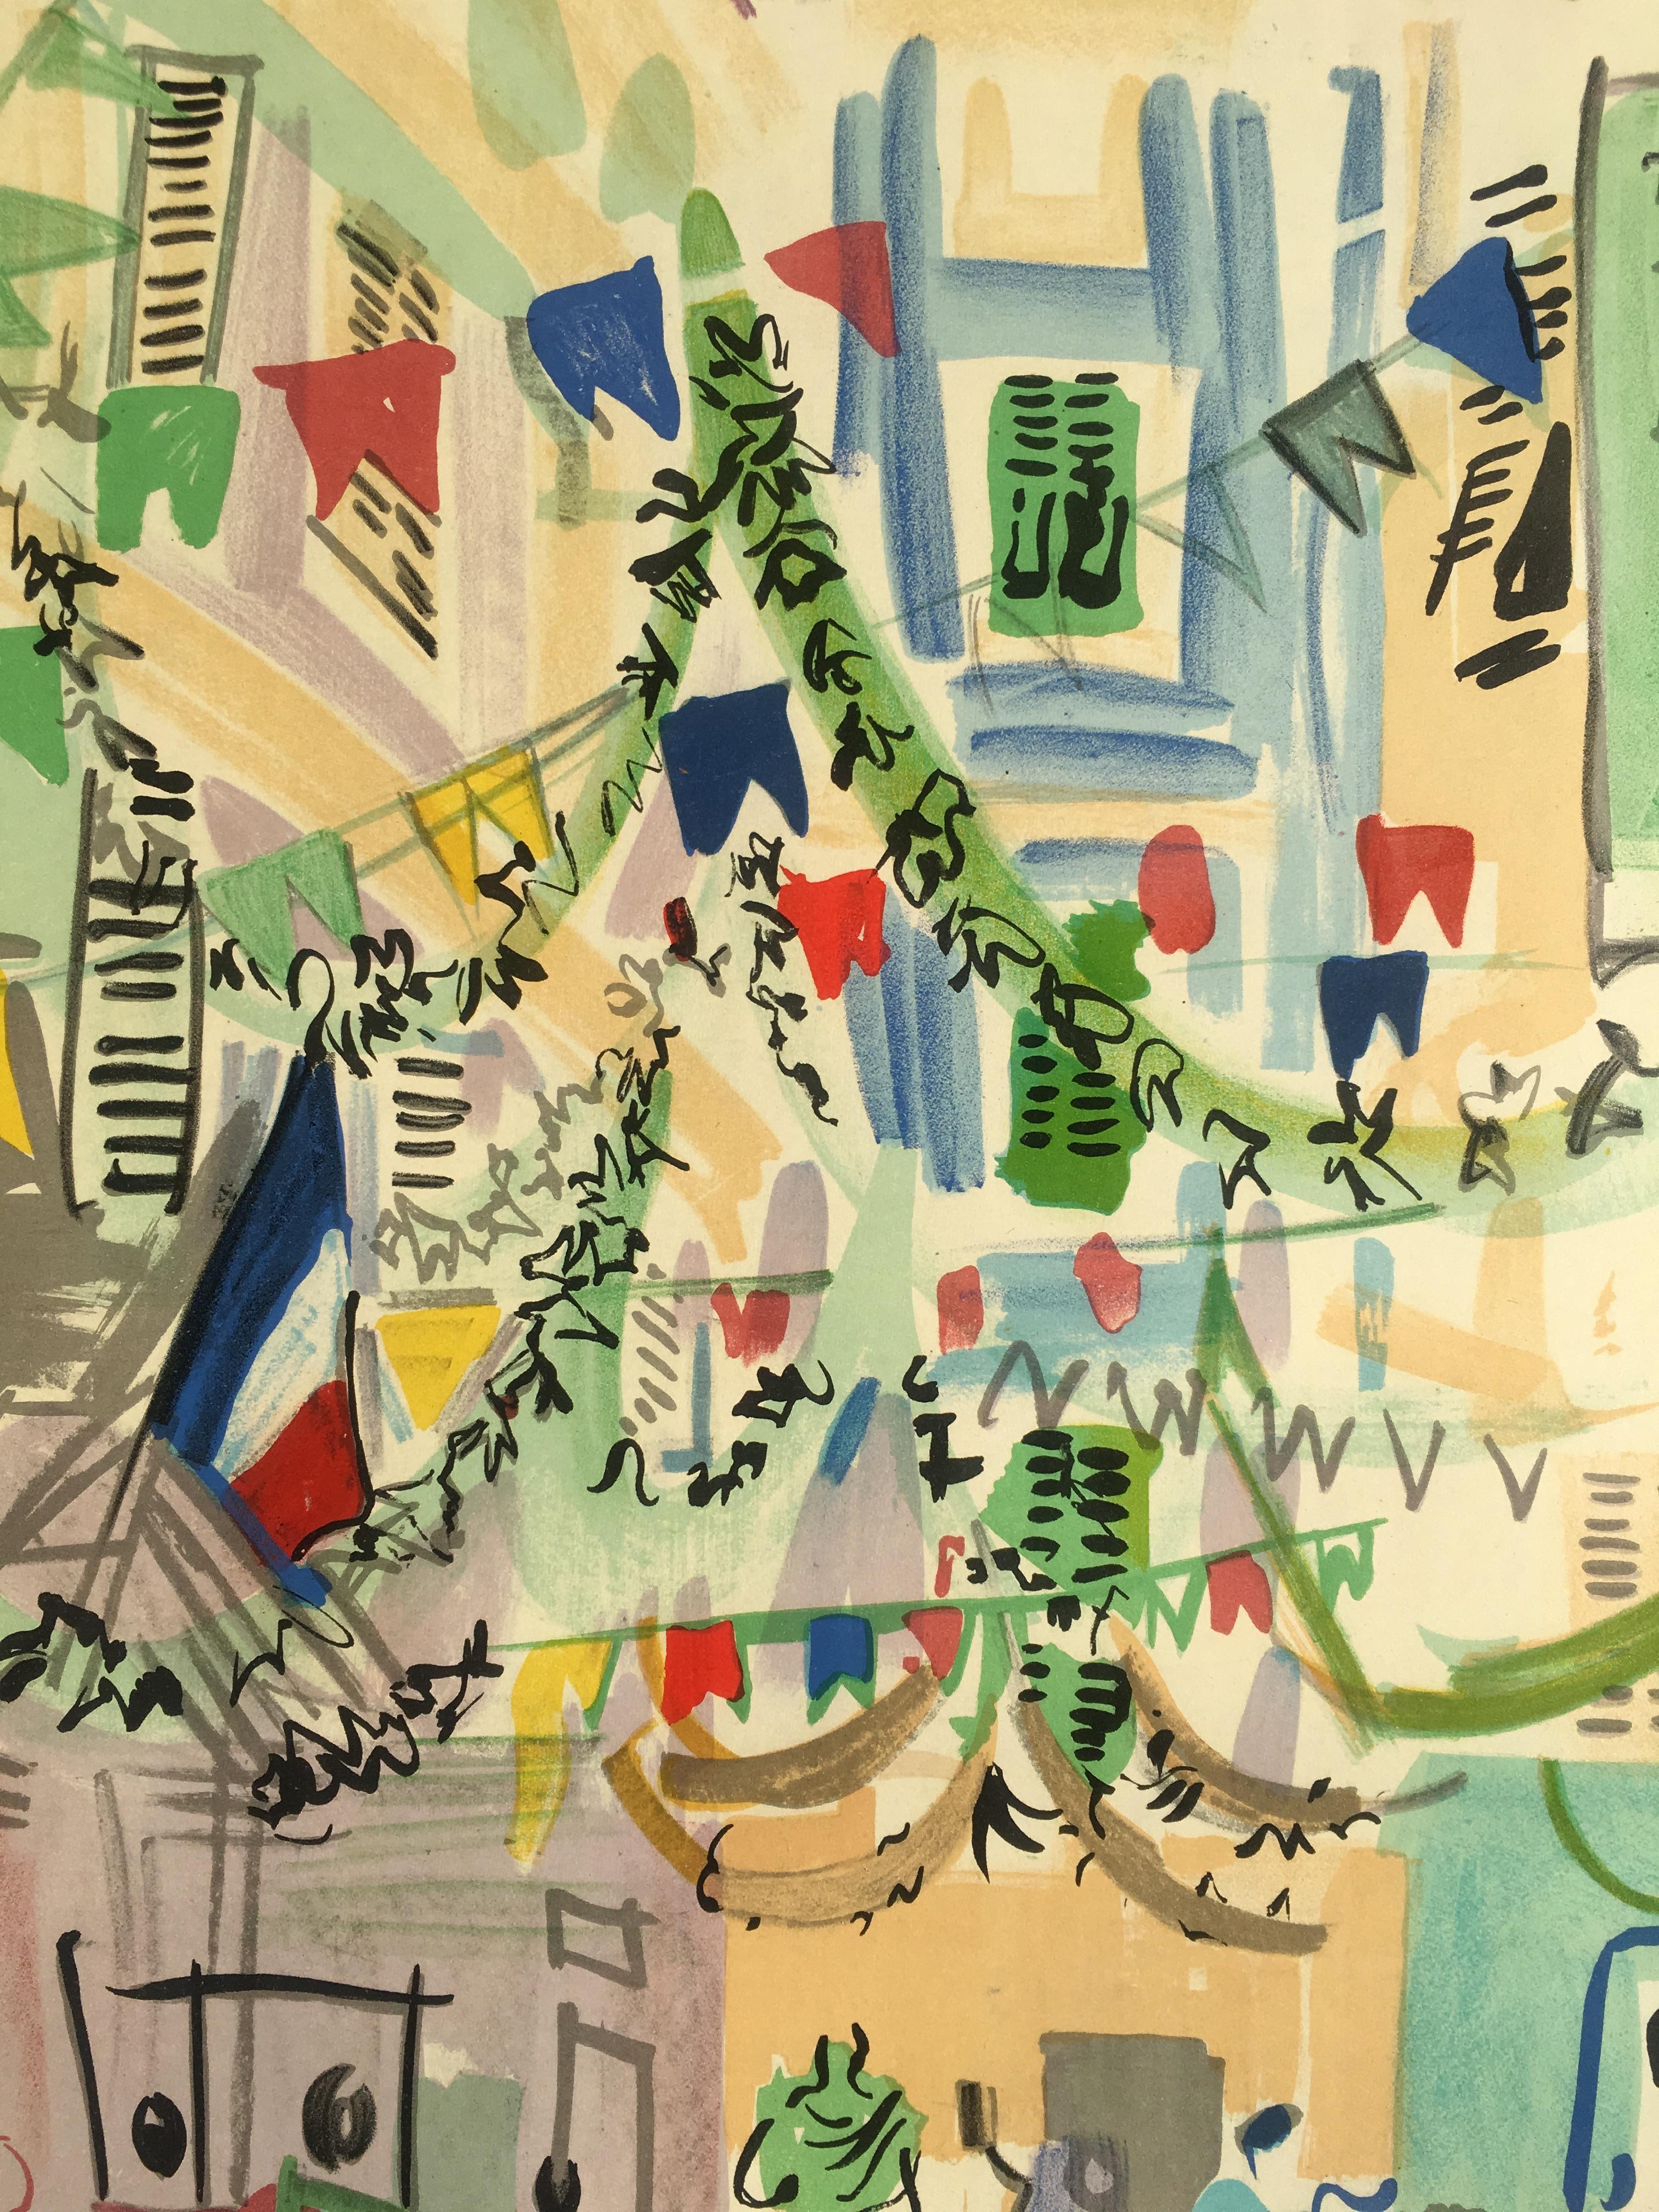 Original midcentury Raoul Dufy art poster from the 1950s printed by Mourlot, Paris with extended exhibition date.

Raoul Dufy was a renowned artist that created excellent works of art in both contemporary and Mid-Century Modern styles. The exhibit